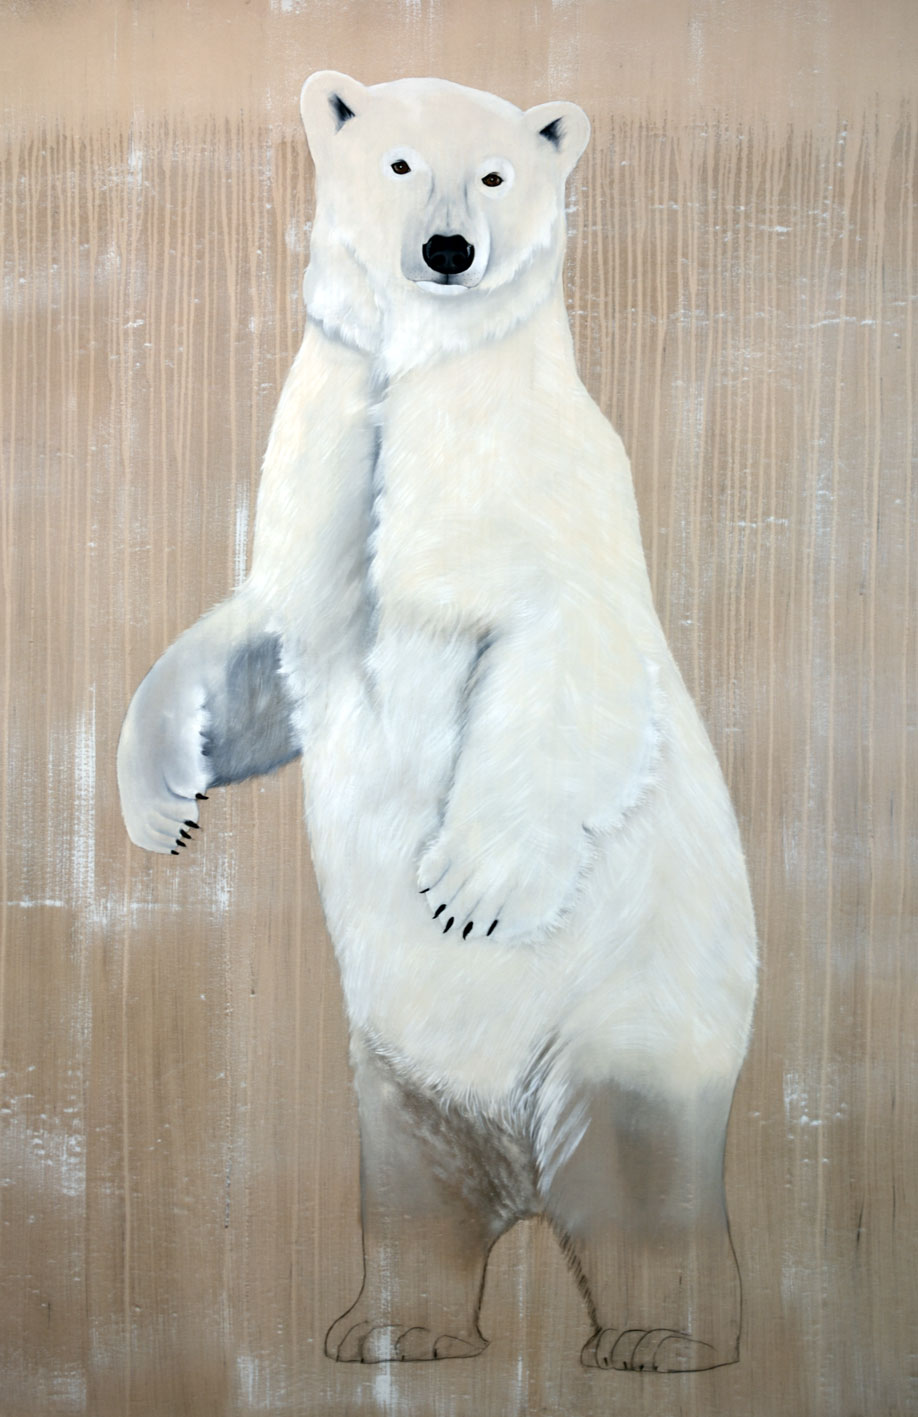 Timbre Delete Ours ursus-maritimus-polar-bear-white-threatened-endangered-extinction Thierry Bisch Contemporary painter animals painting art  nature biodiversity conservation 